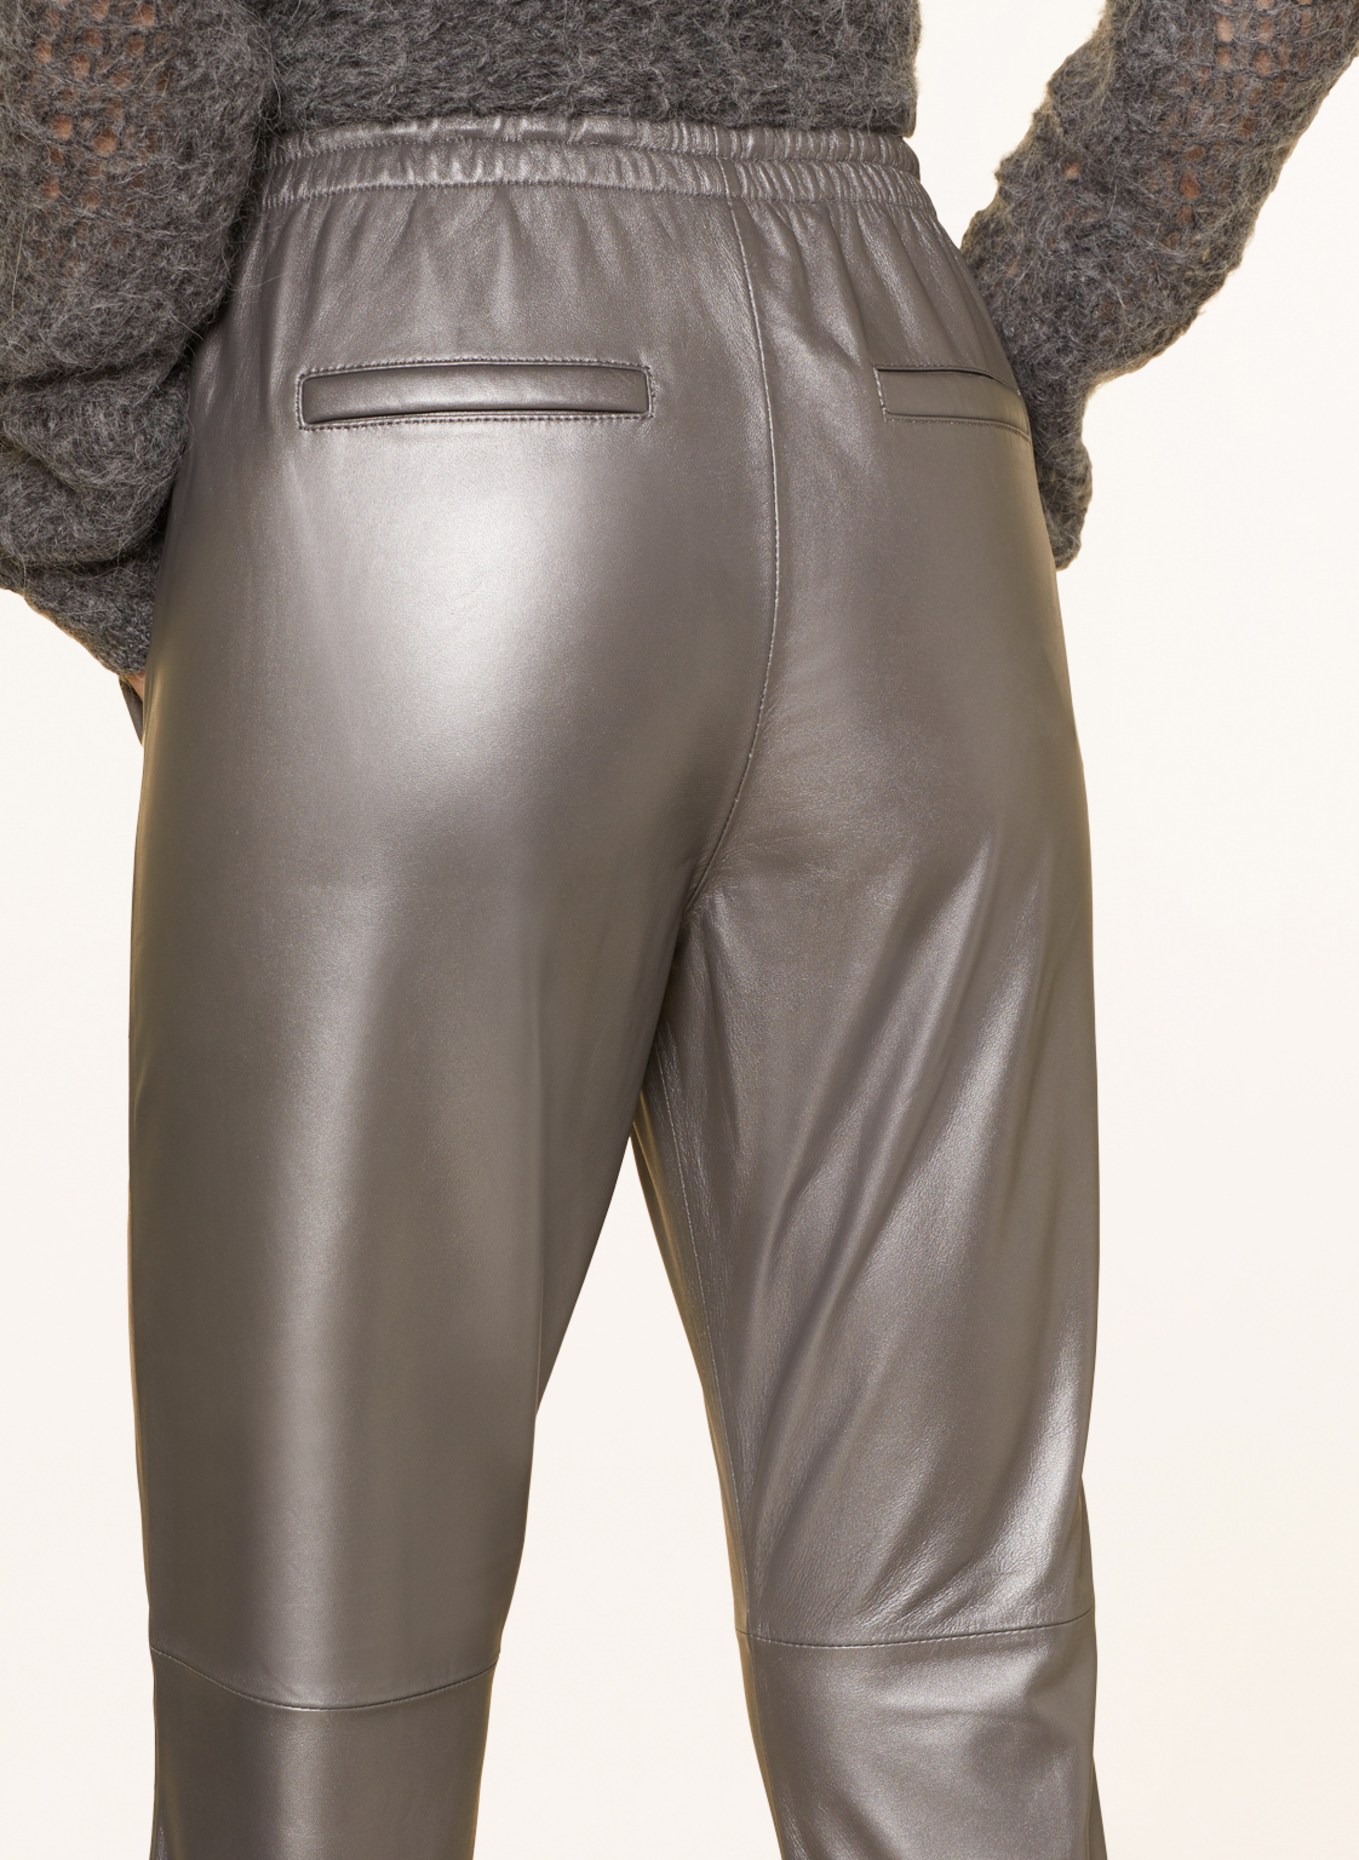 OAKWOOD 7/8 leather trousers in jogger style, Color: GRAY (Image 5)